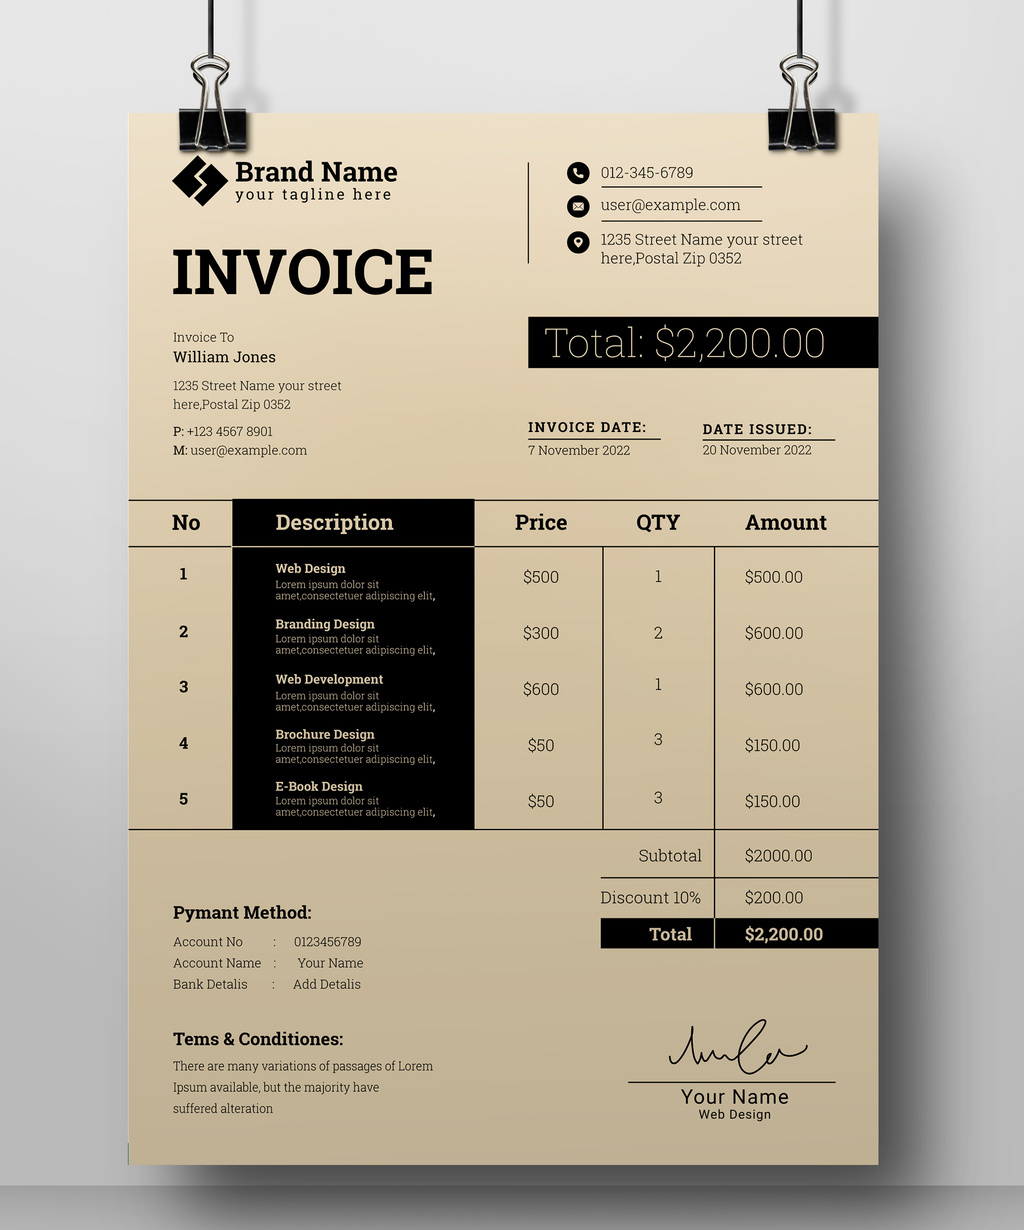 Simple Invoice Layout (AI Format)